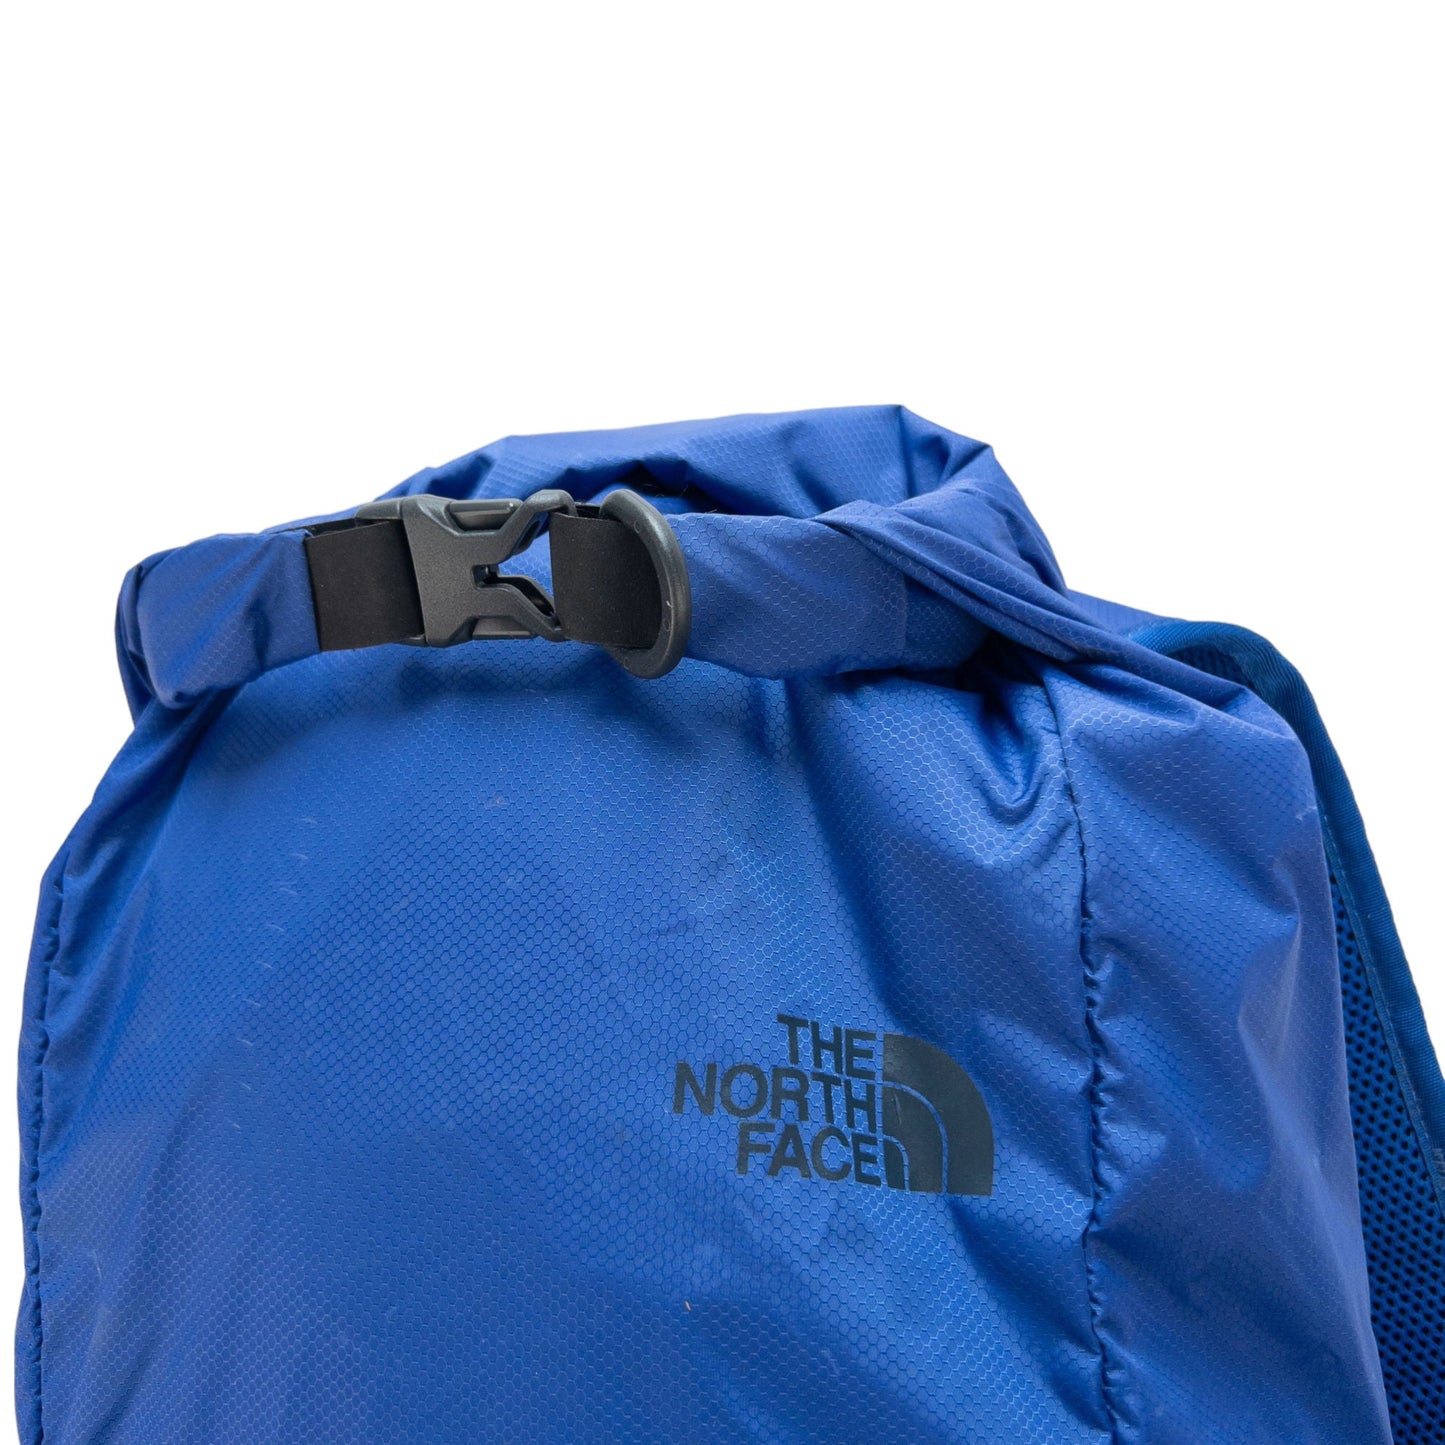 Vintage The North Face Roll Top Dry Backpack